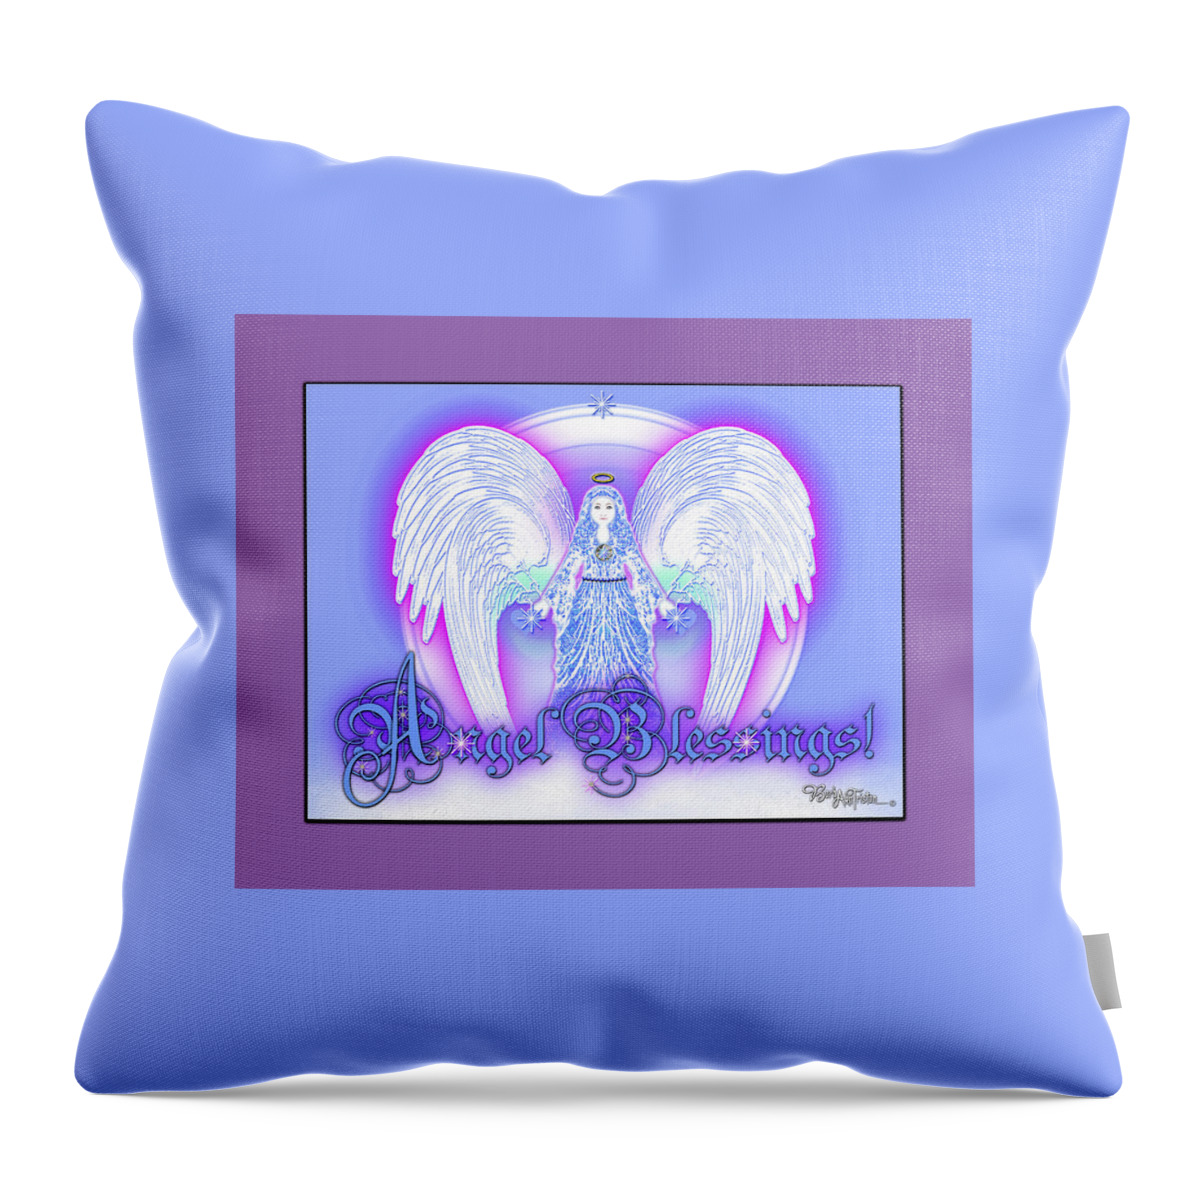 Inspiration Throw Pillow featuring the digital art Angel Blessings #196 by Barbara Tristan